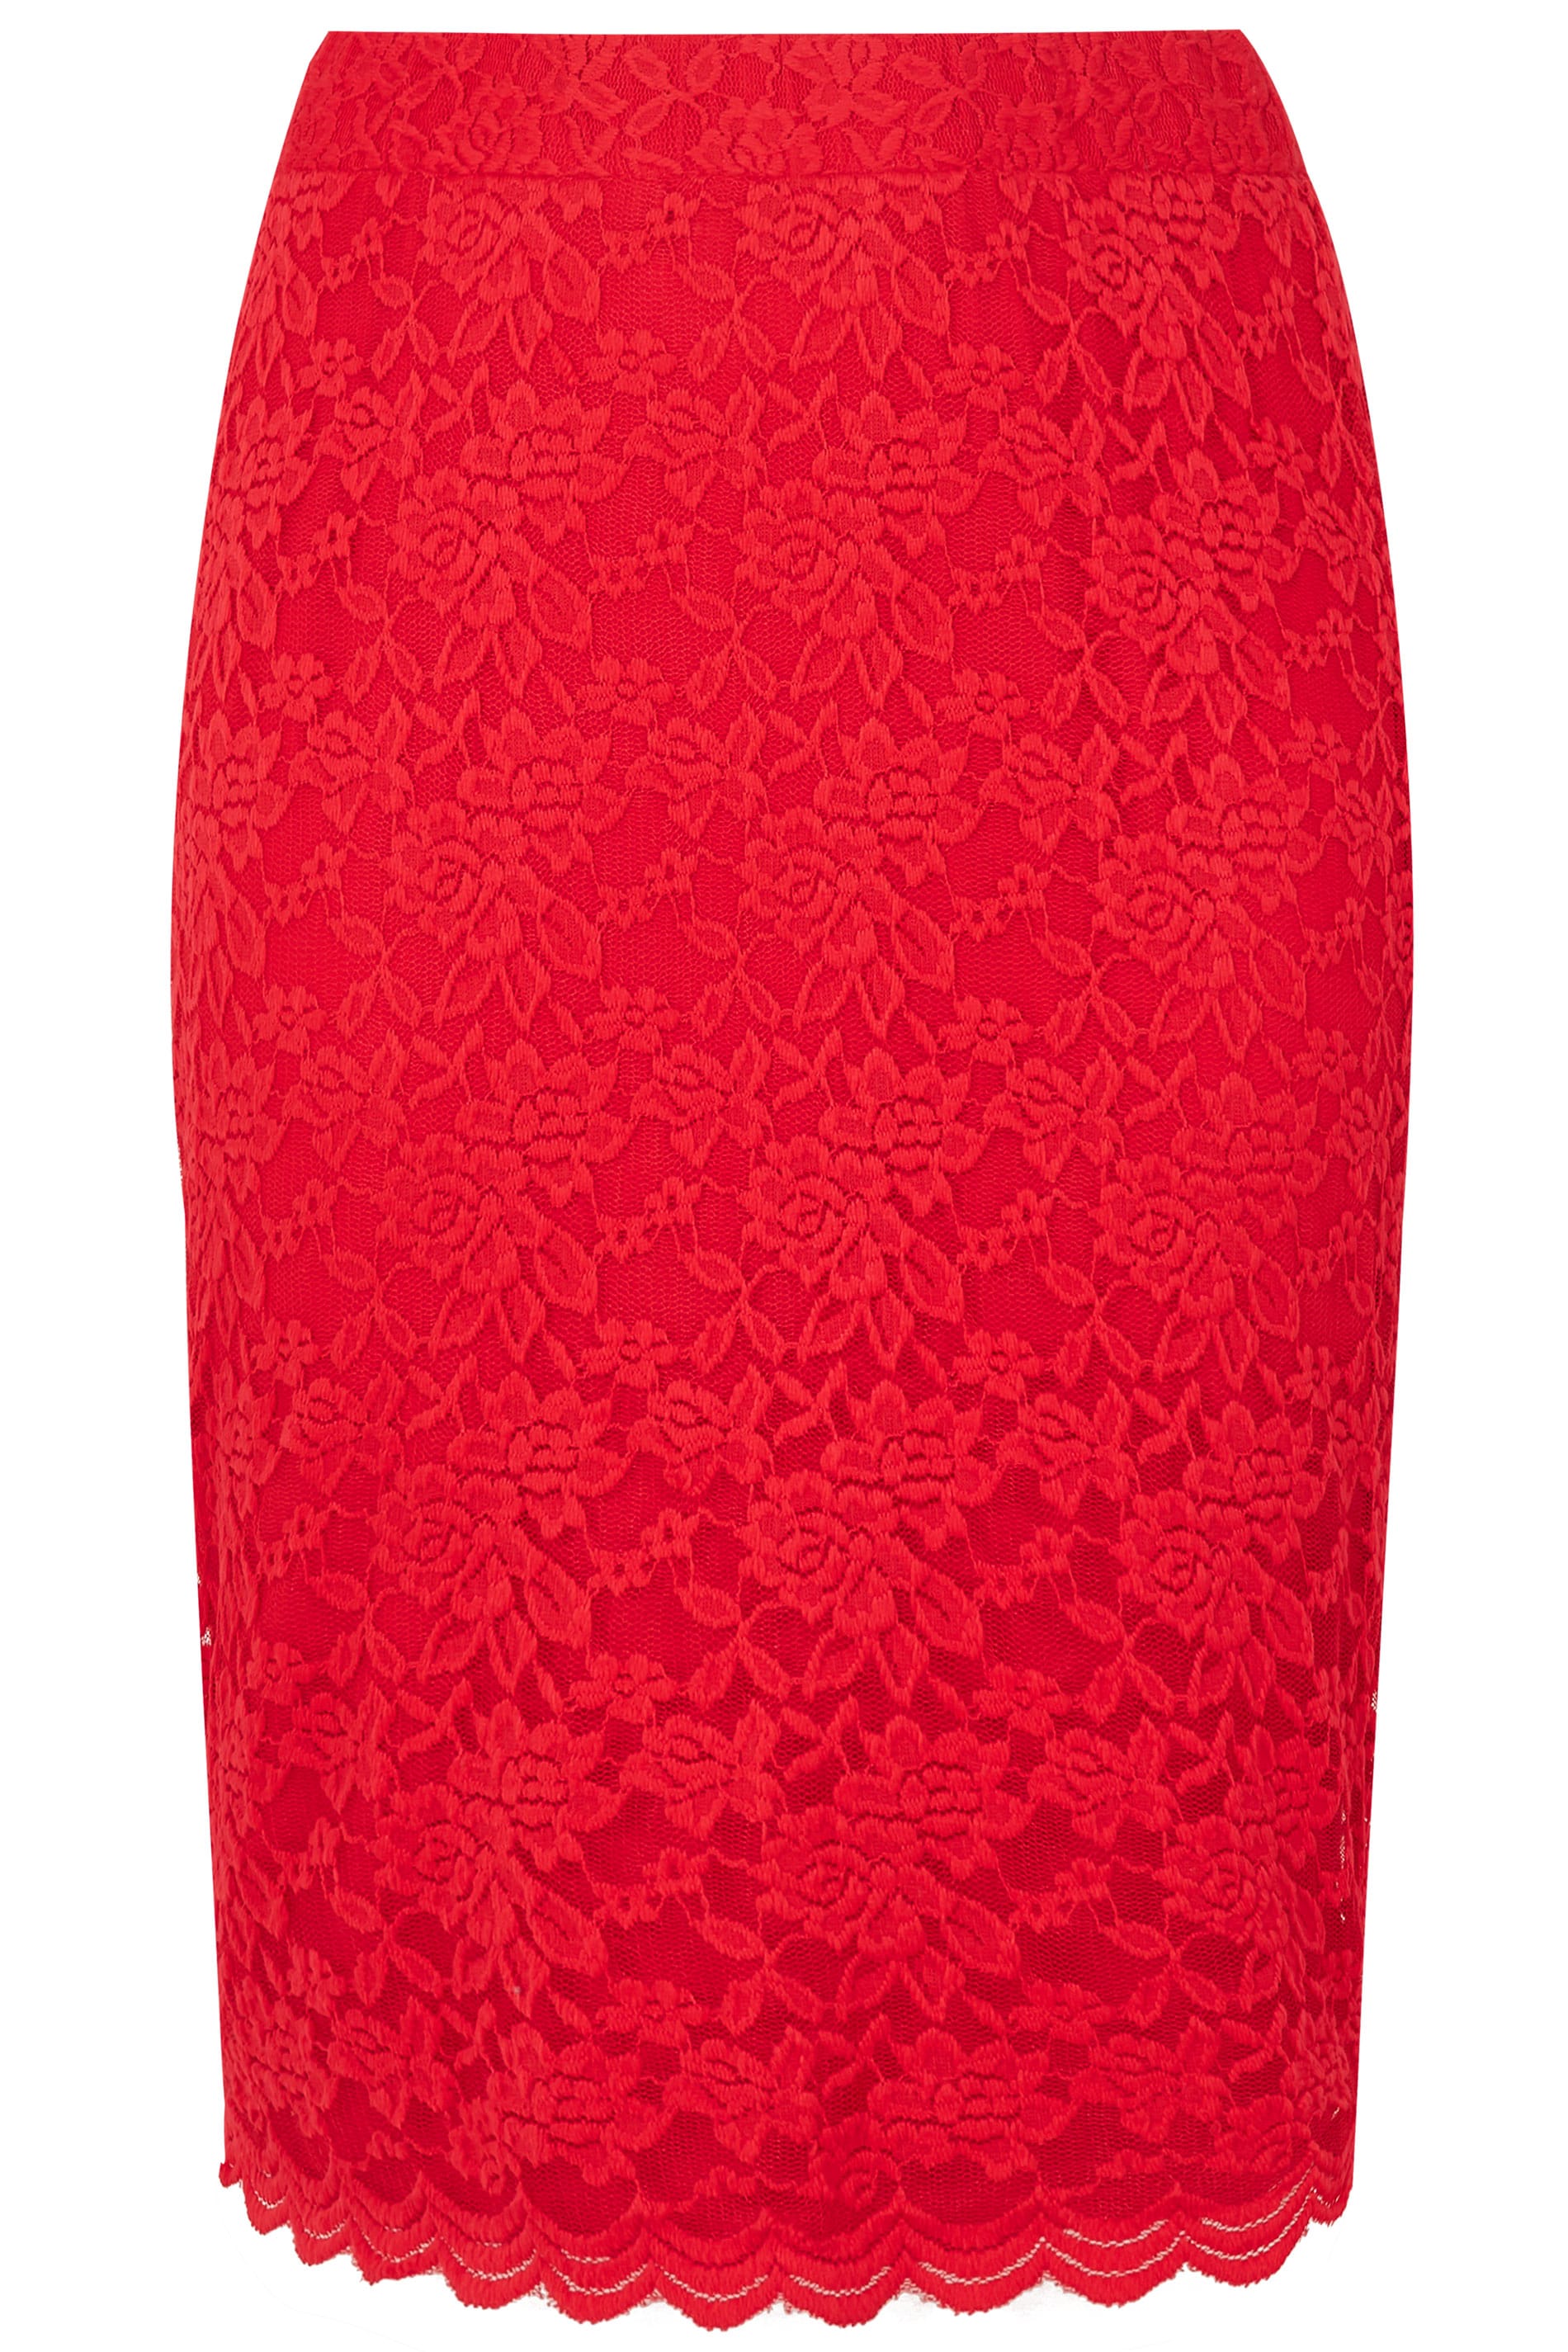 YOURS LONDON Red Stretch Lace Pencil Skirt With Scalloped Hem, plus ...